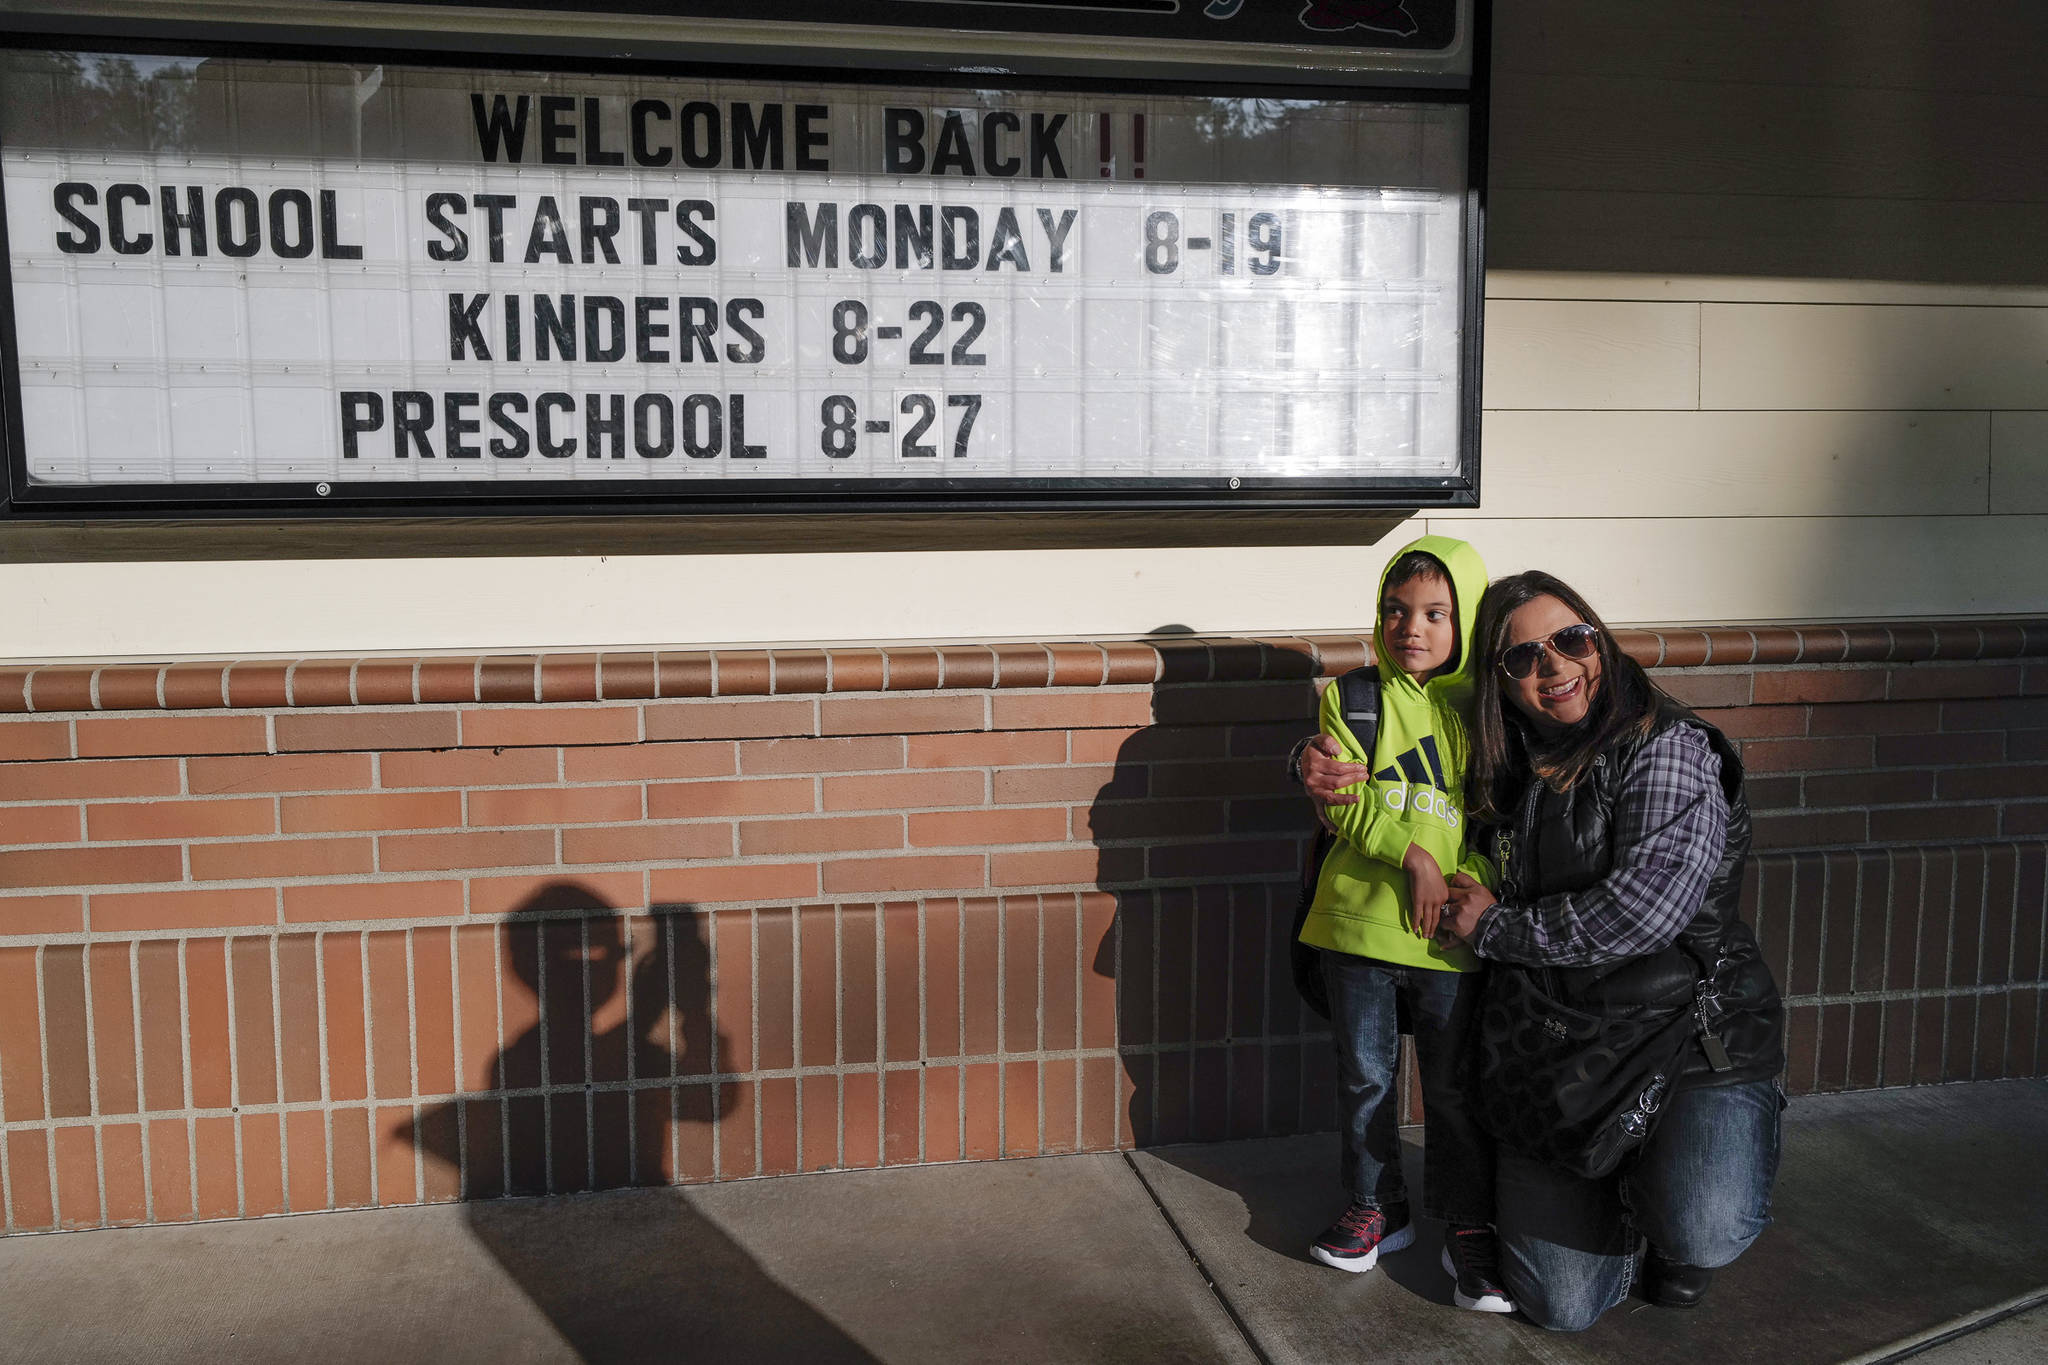 Fifth-grader Gage Keller, takes a picture of his brother Gary arriving for second grade with their mother, Lisa, on the first day of school at Riverbend Elementary School on Monday, Aug. 19, 2019. (Michael Penn | Juneau Empire)